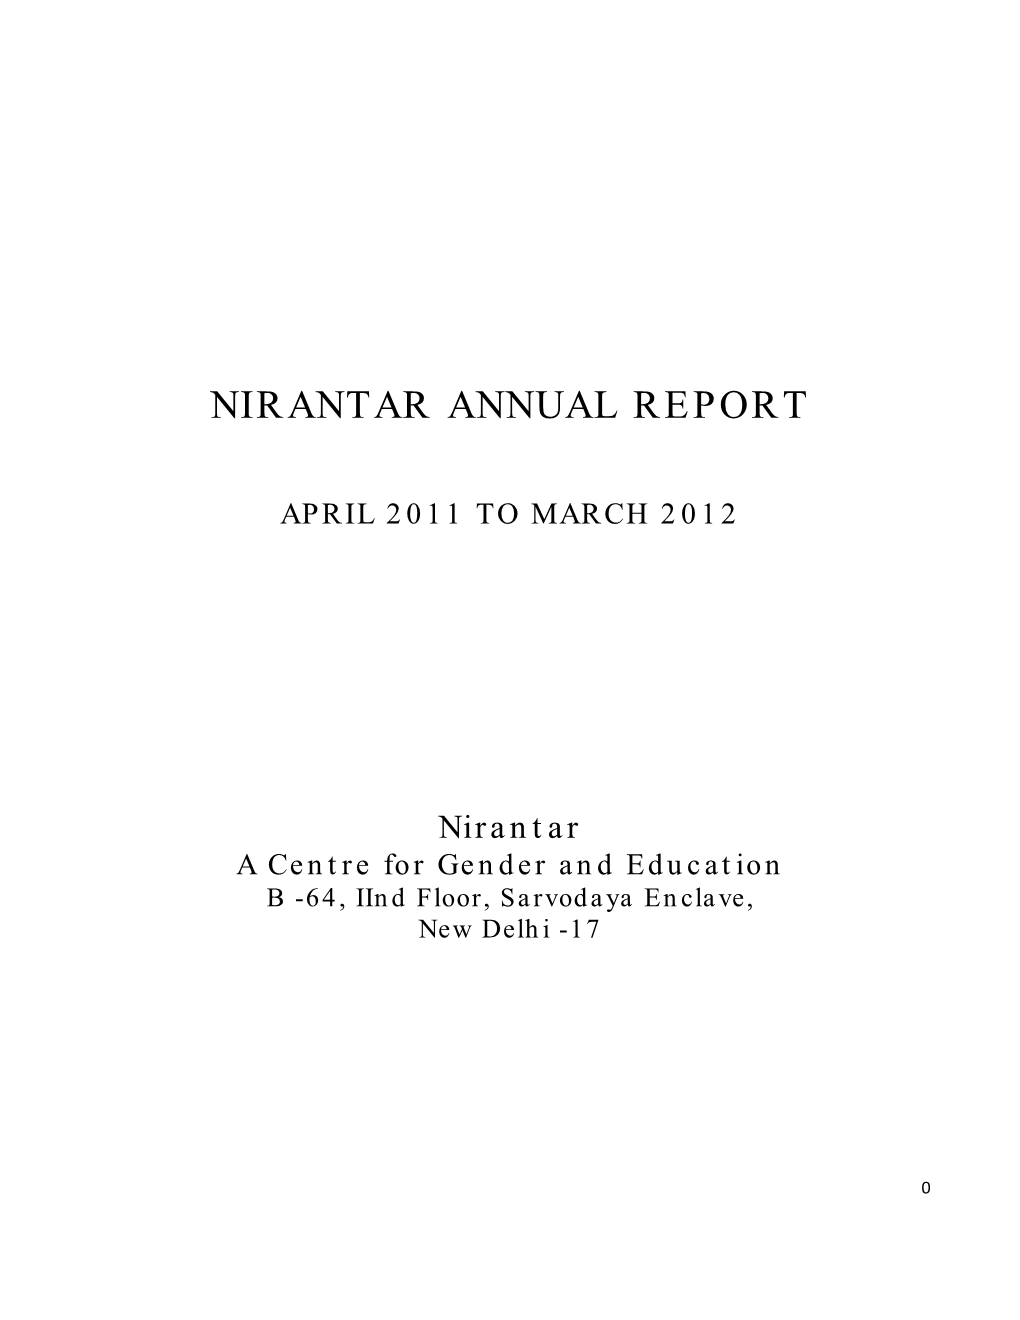 Annual Report from Year 2011-12